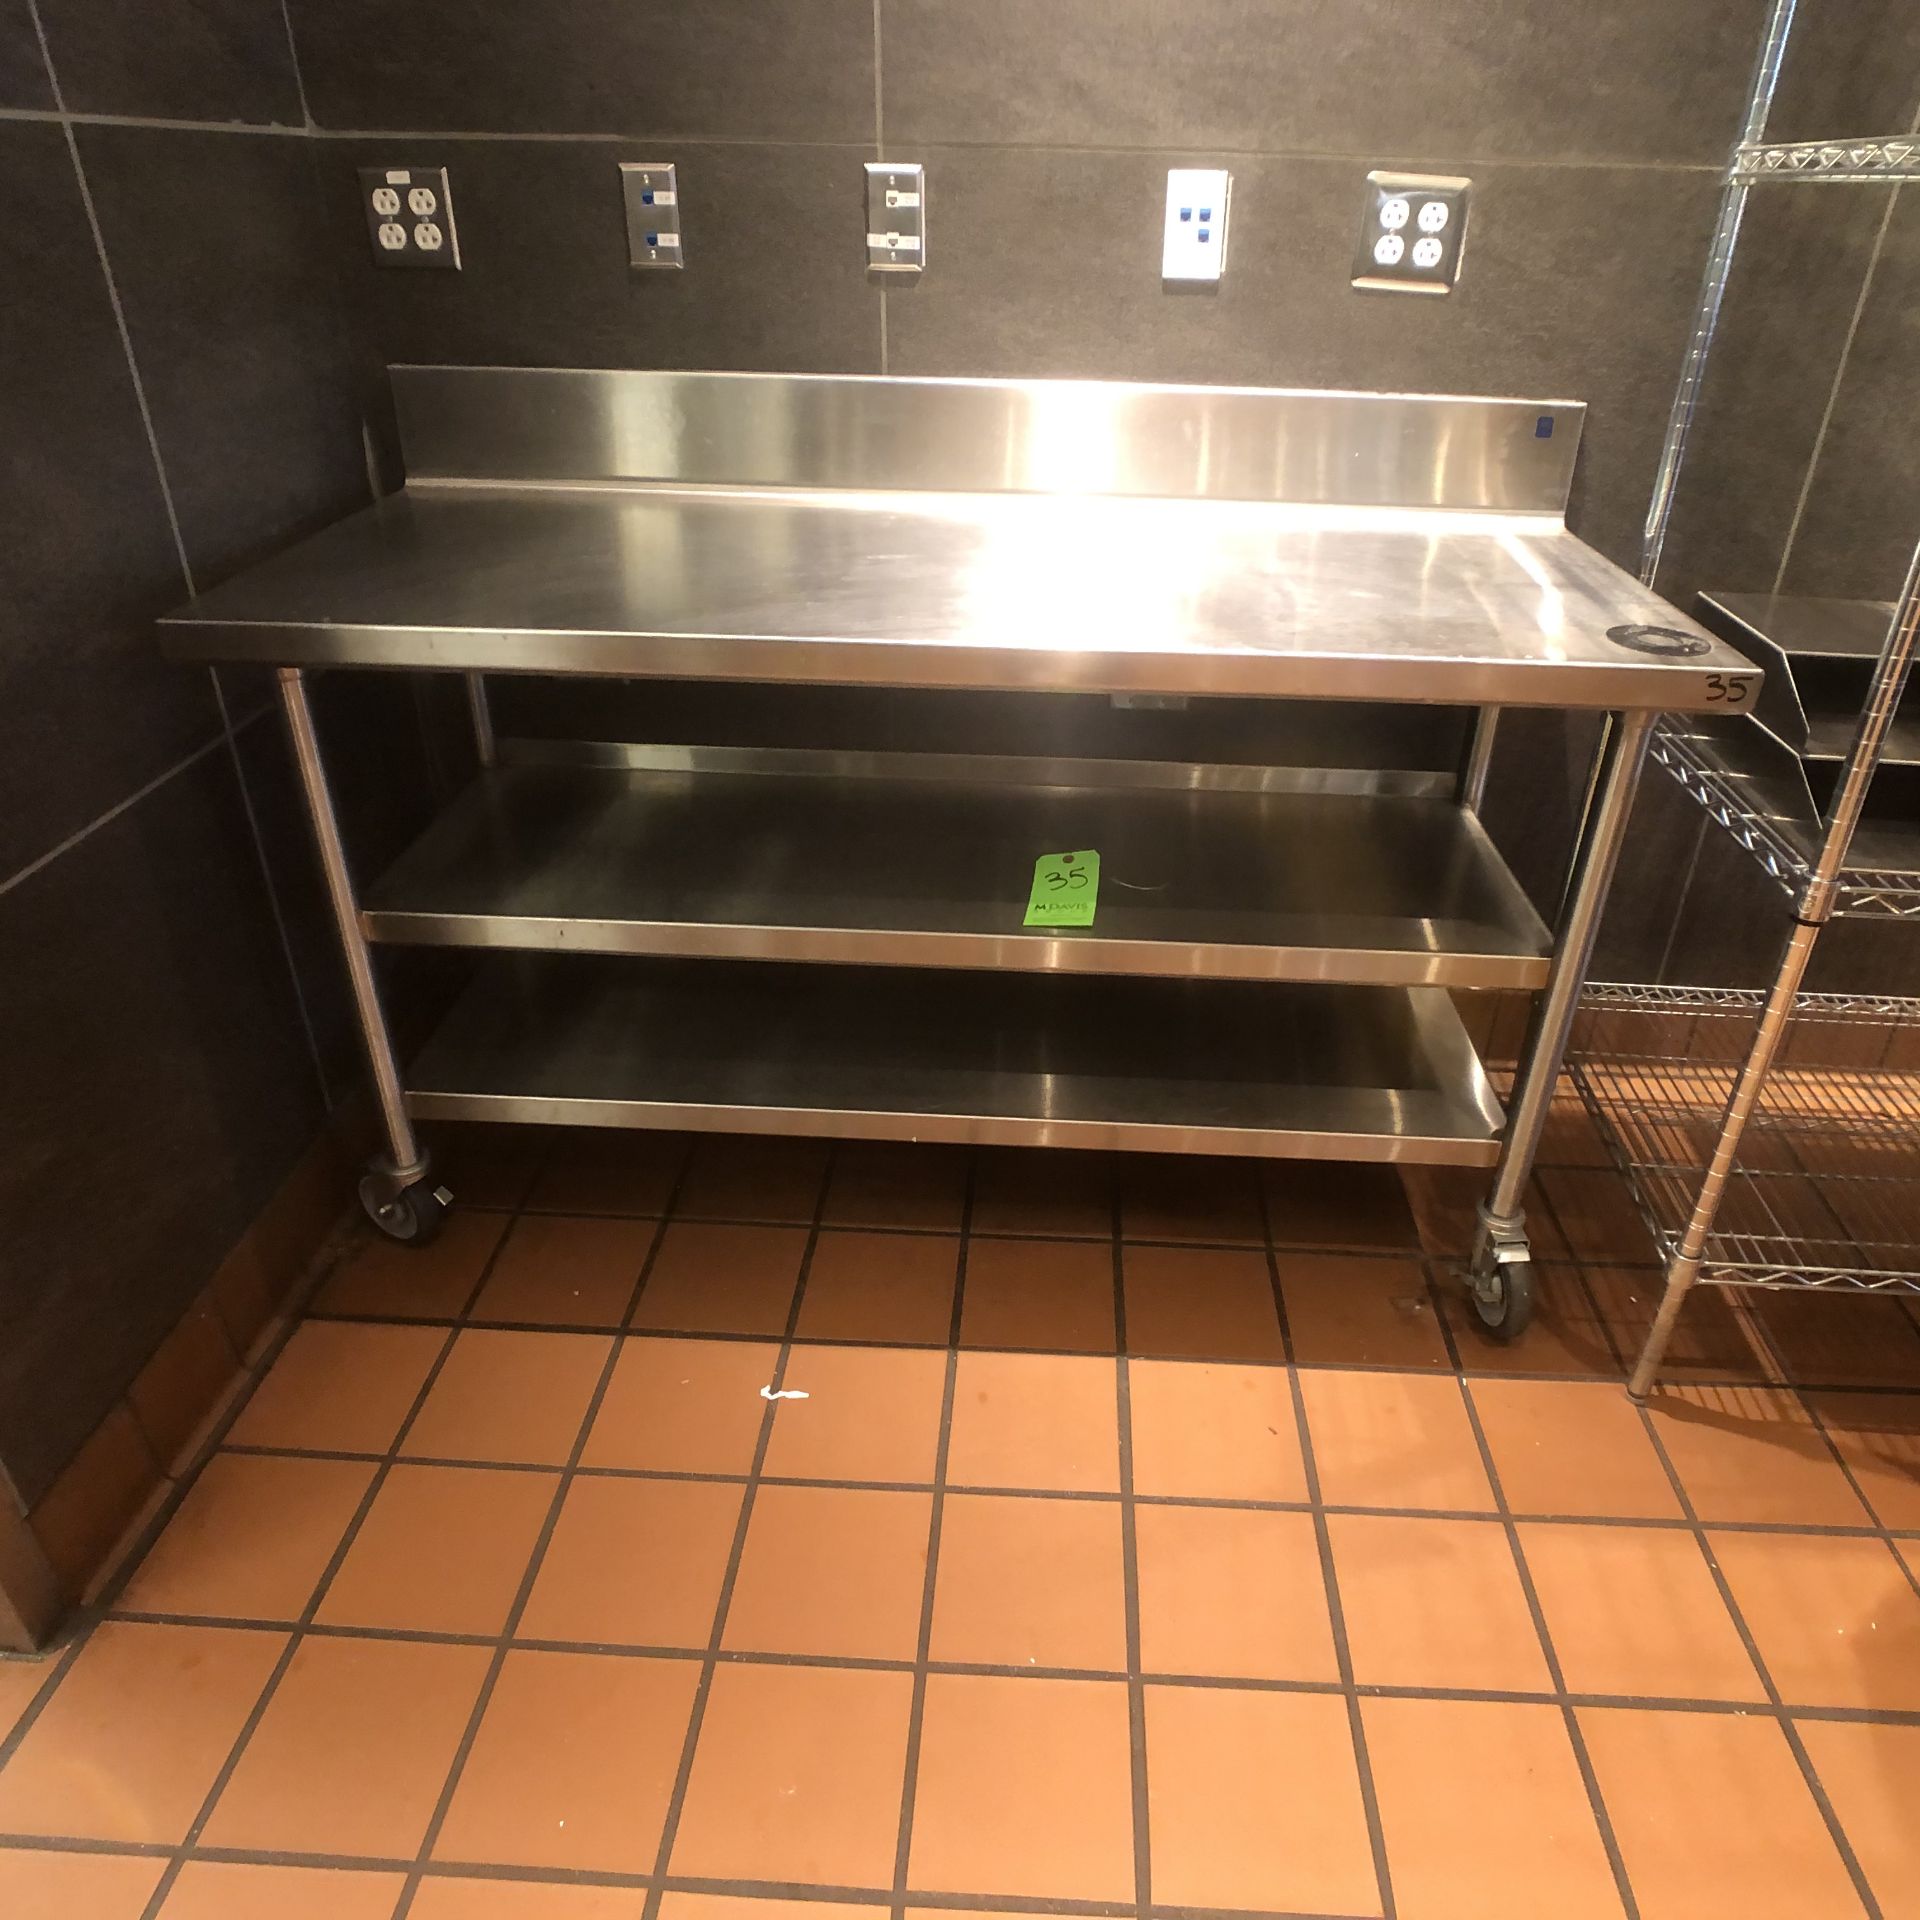 Approx. 5' L x 2" W S/S Portable Table with S/S Backsplash and Shelves